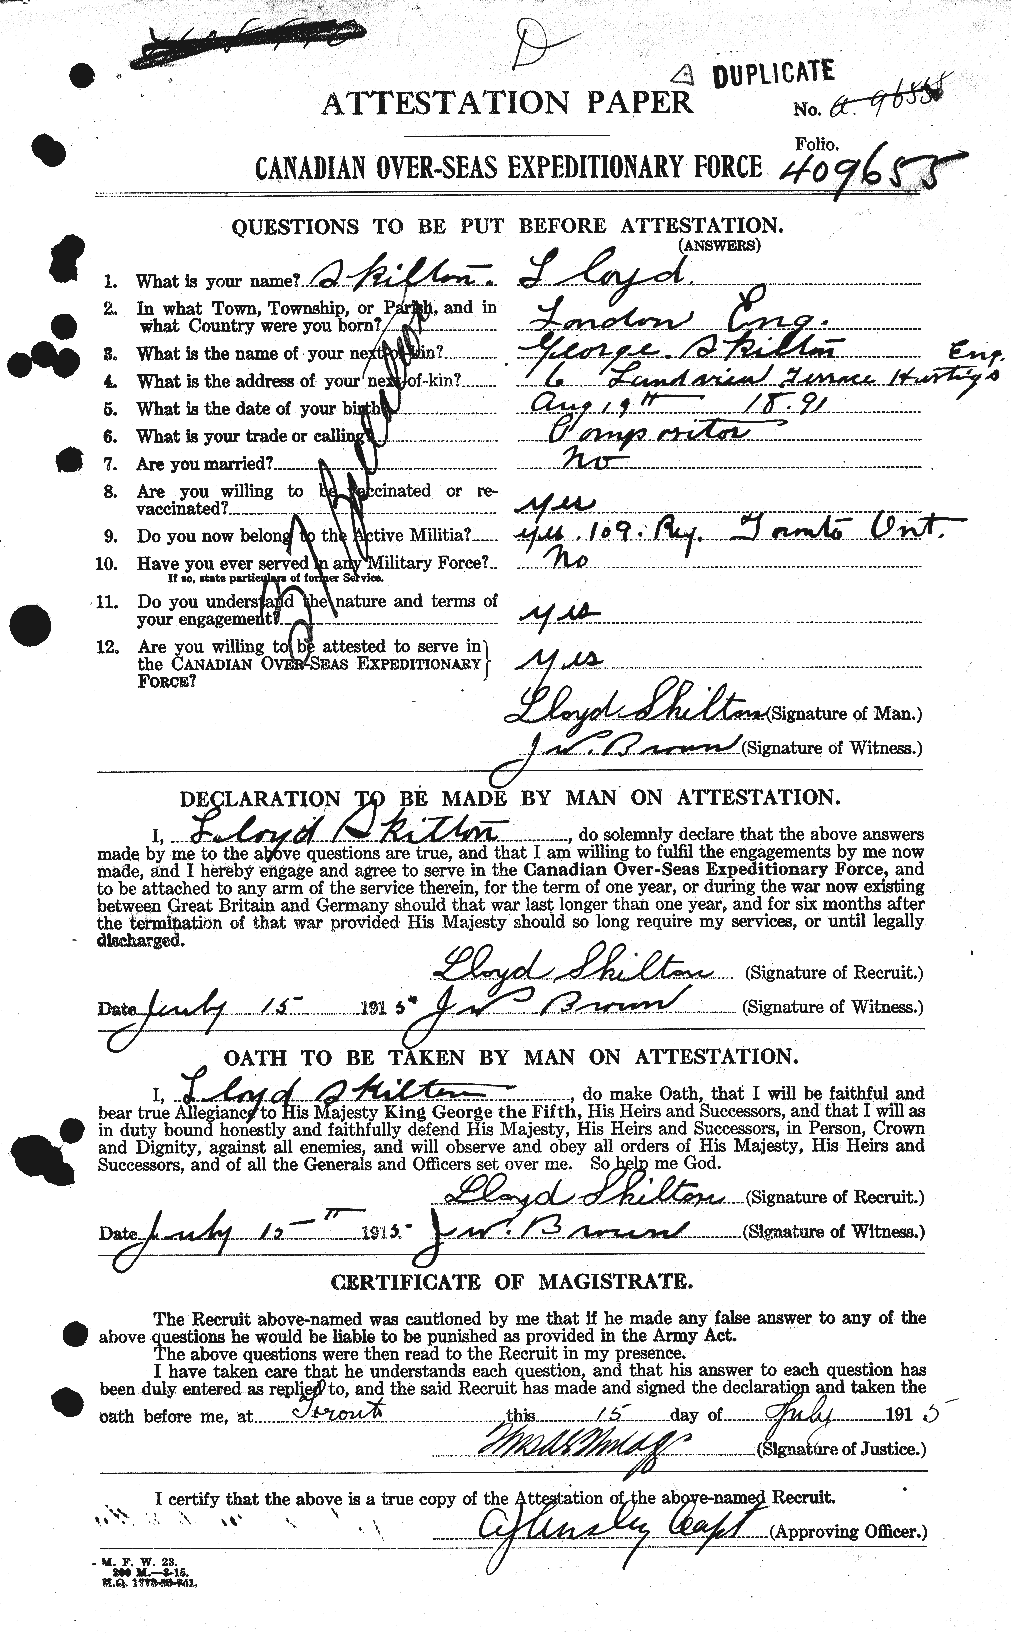 Personnel Records of the First World War - CEF 098590a